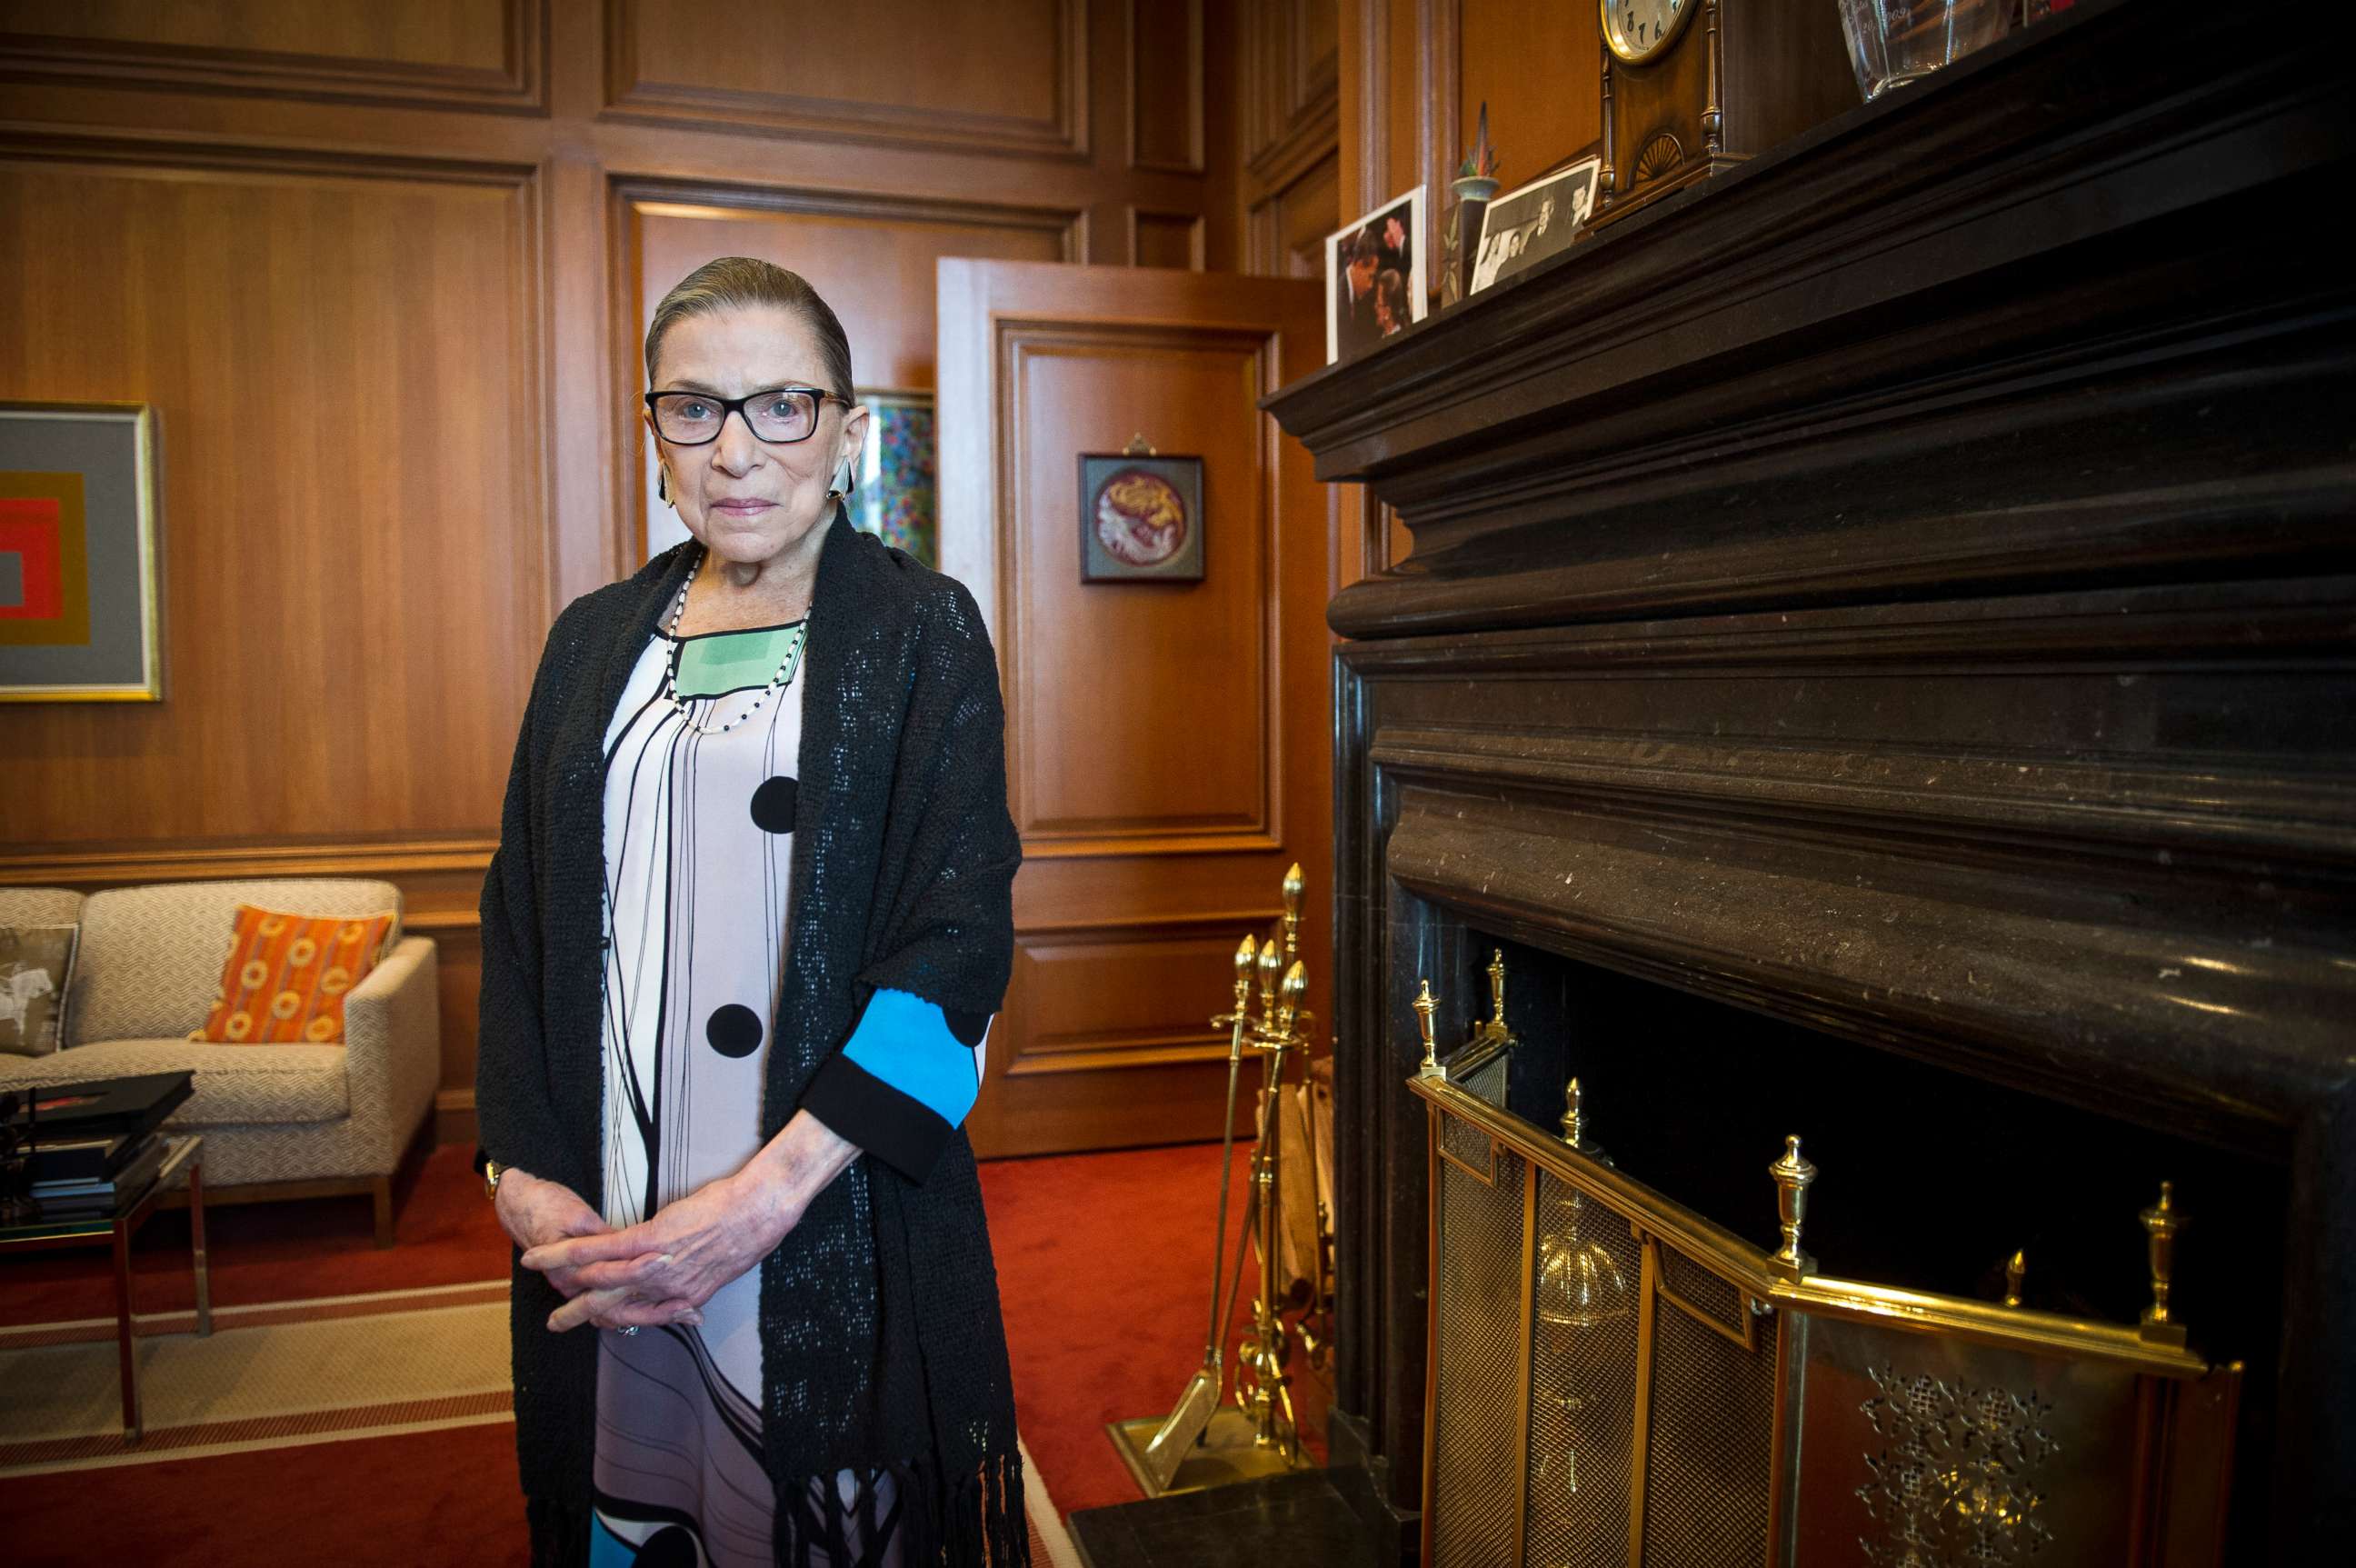 PHOTO: In this July 31, 2014, file photo, Associate Justice Ruth Bader Ginsburg is seen in her chambers in at the Supreme Court in Washington. The Supreme Court says Ginsburg has died of metastatic pancreatic cancer at age 87.